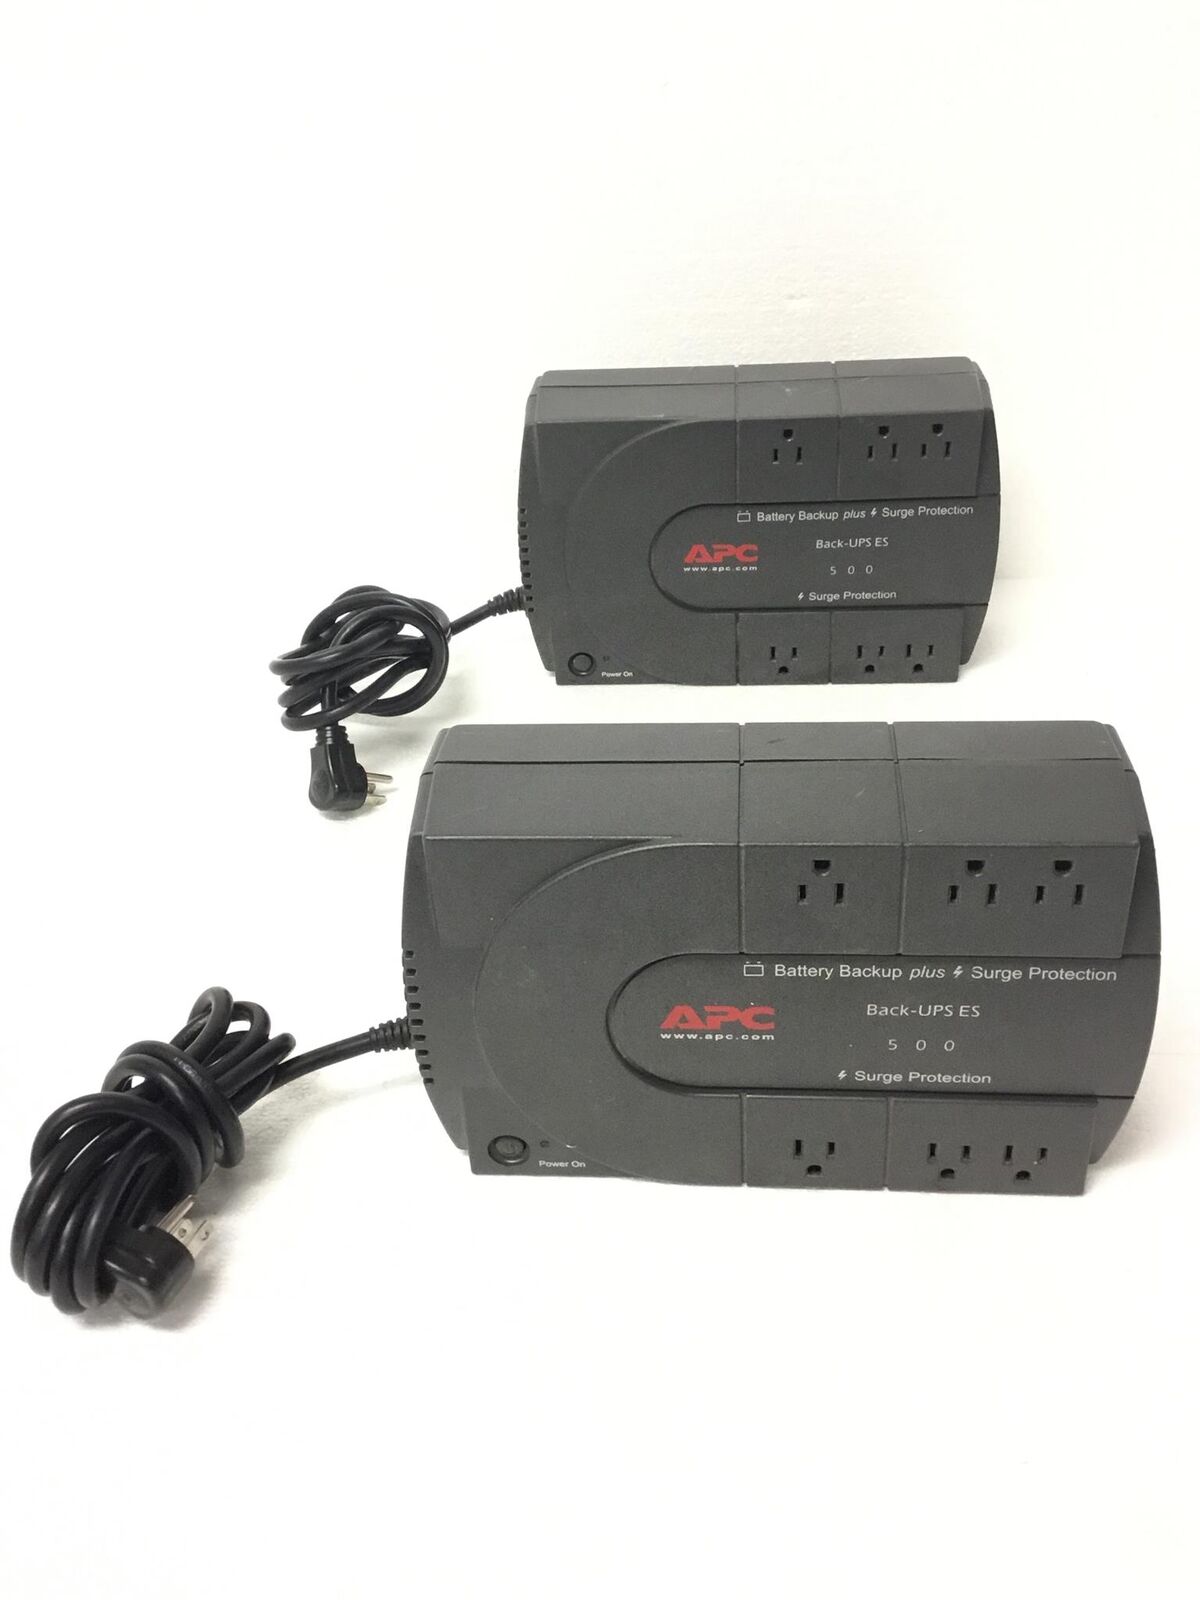 2x APC Back-UPS ES 500 BE500U 6 Outlets UPS Power Supply w/Cables,No Battery